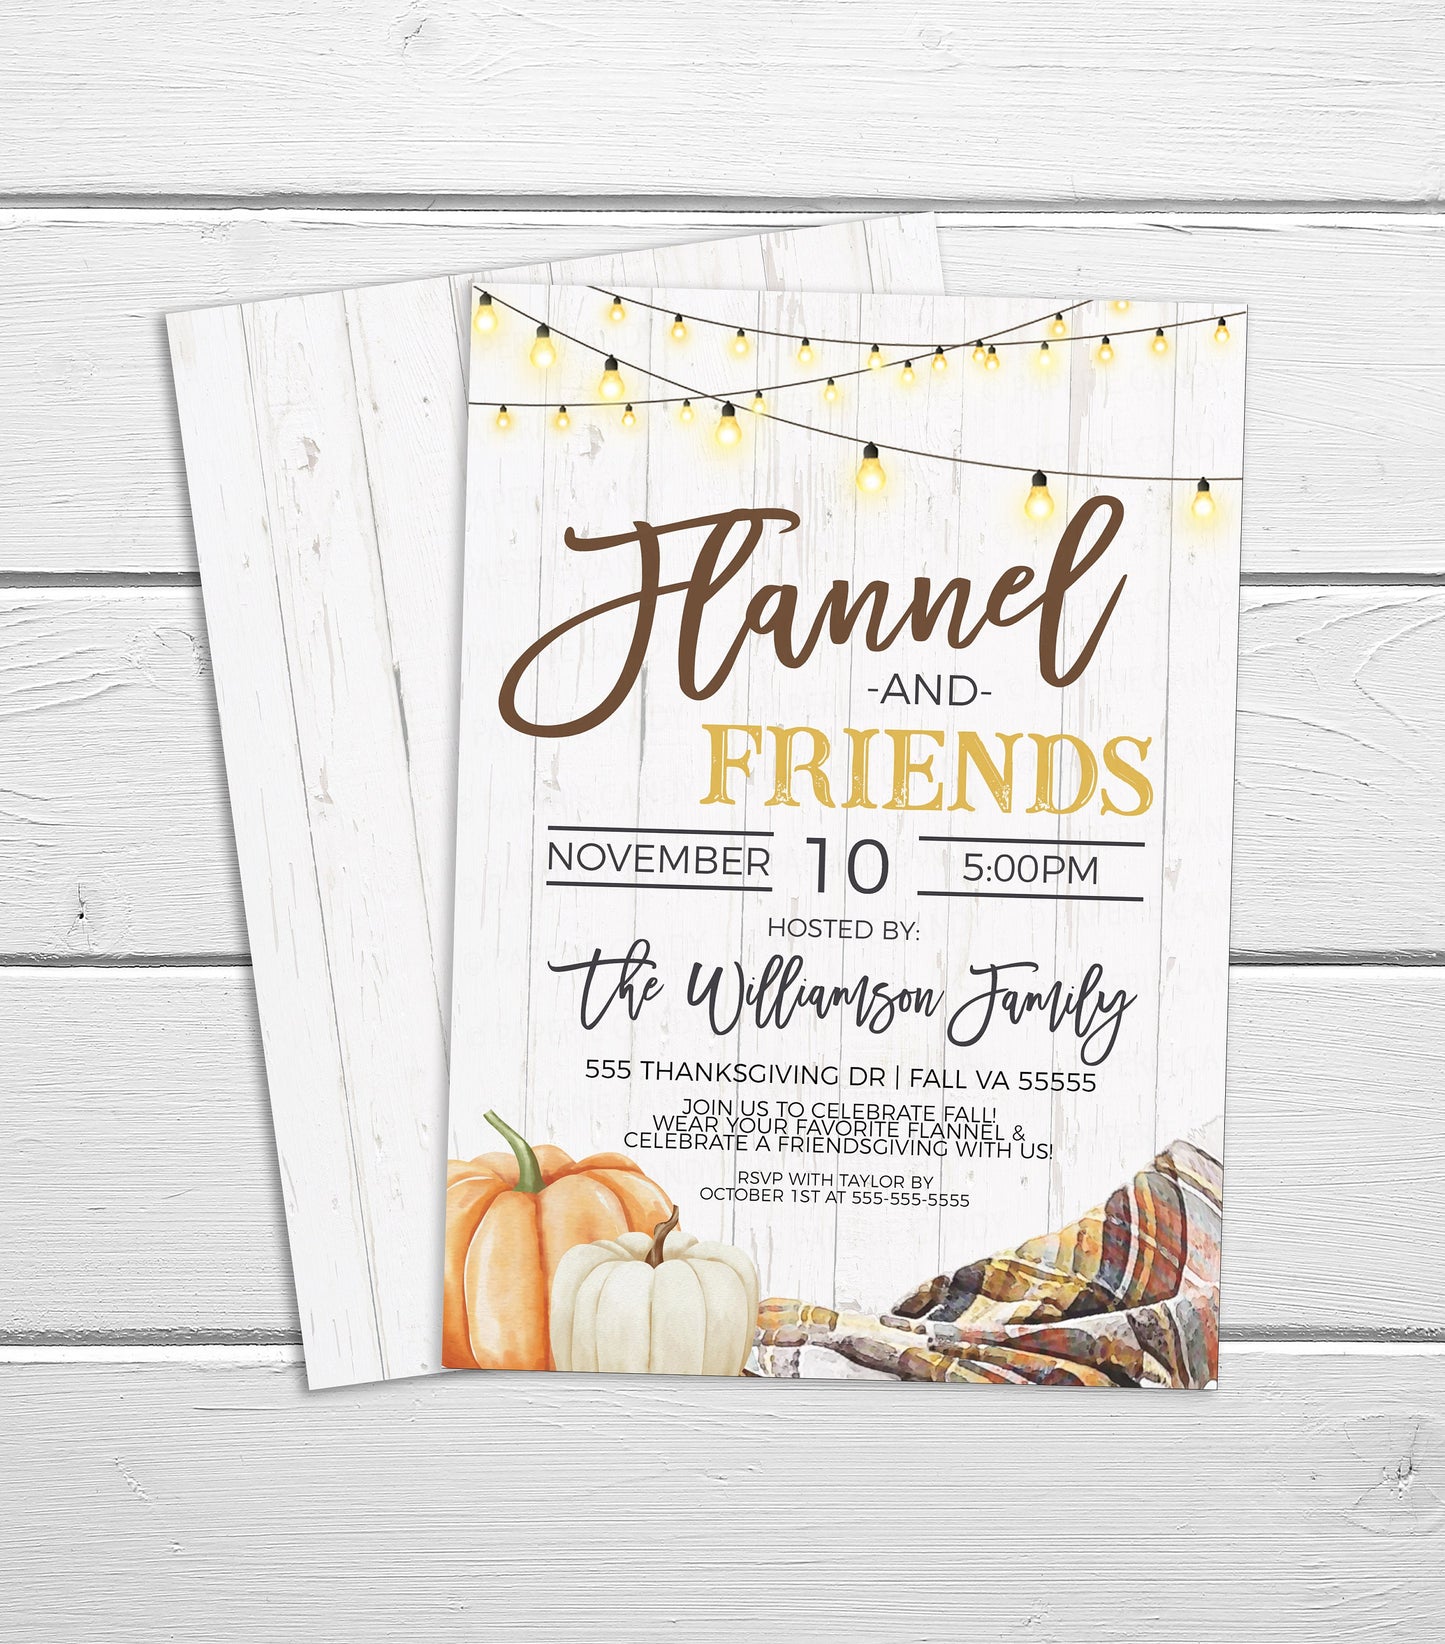 Friendsgiving Invitation, Flannel And Friends Party Invite, Fall Friends Thanksgiving, Dinner Brunch Lunch, Editable Printable Template